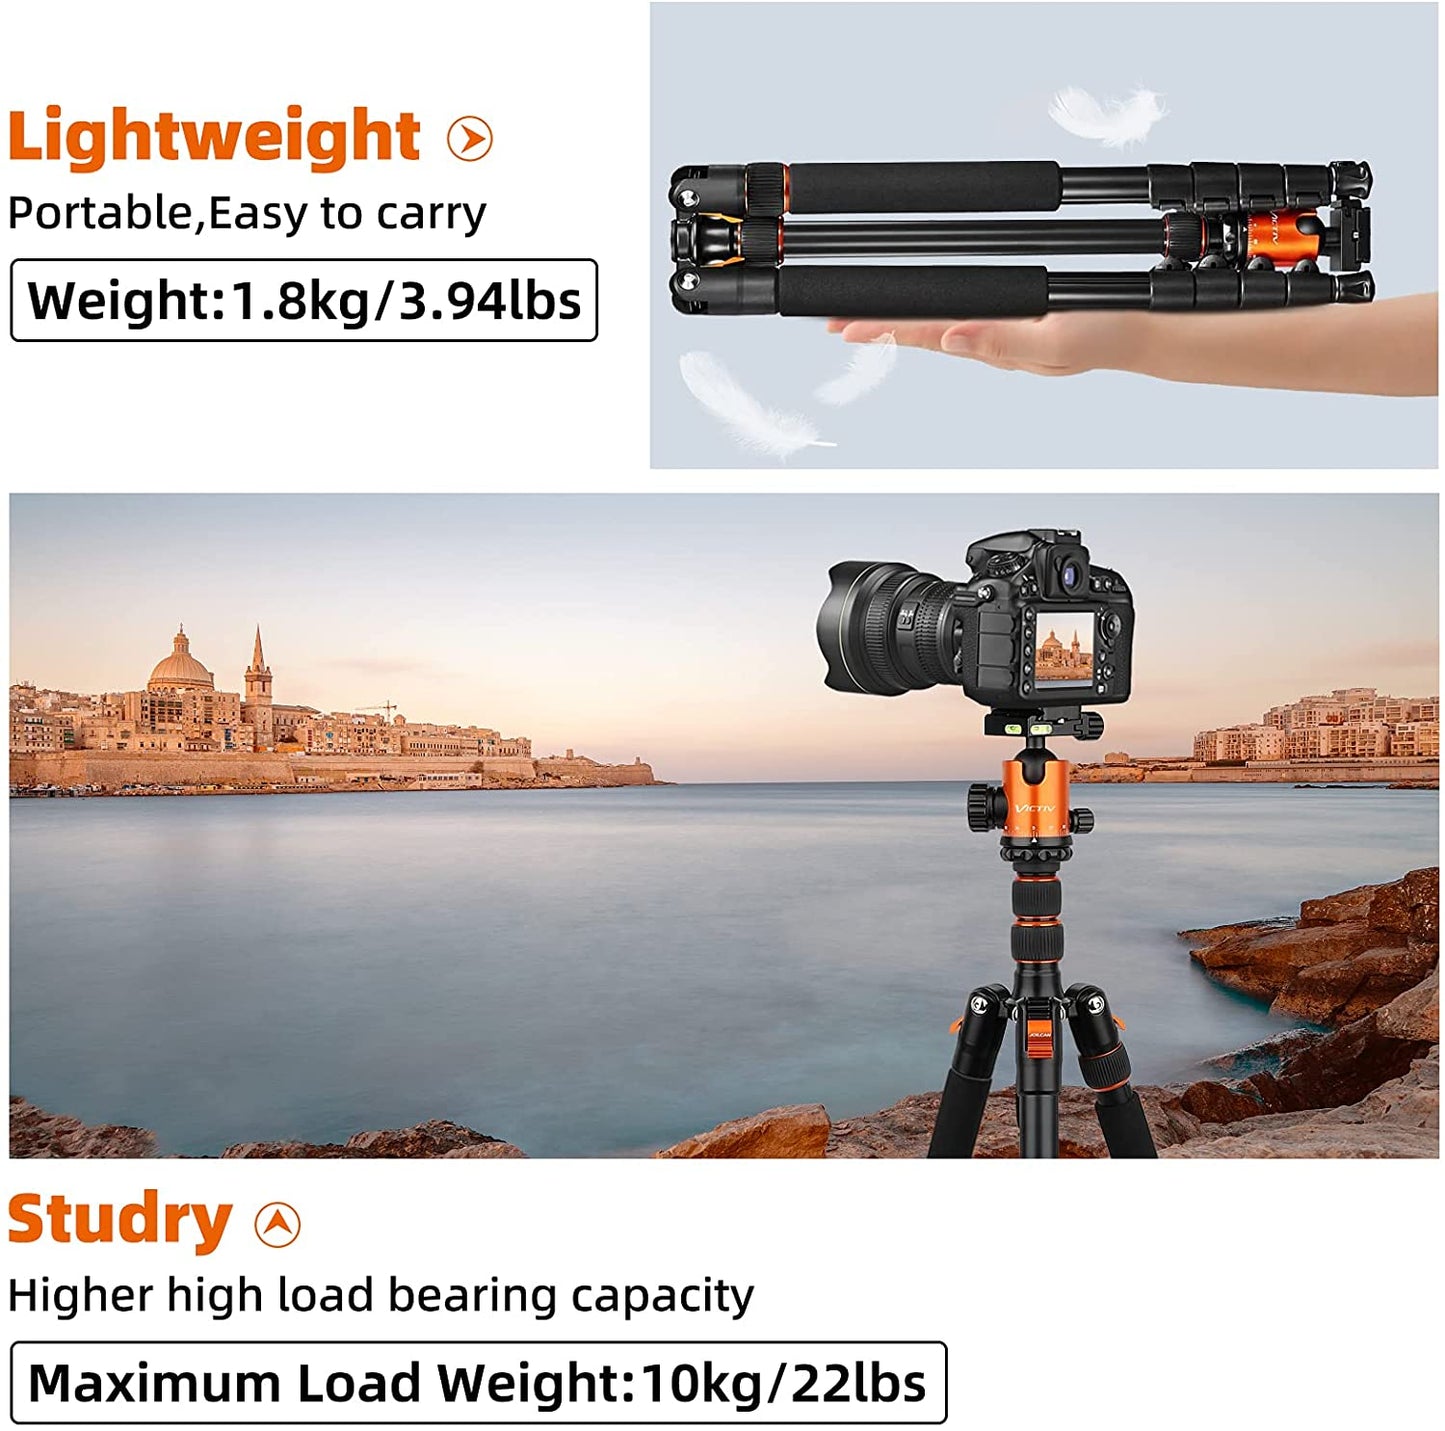 Victiv Camera Tripod Aluminum 81 inch, Tall Tripod/Monopod for DSLR with 36mm Ball Head Supports up to 22 lbs and 16.5 inch When Folded, Heavy Duty Travel Tripod with Carry Bag – Orange